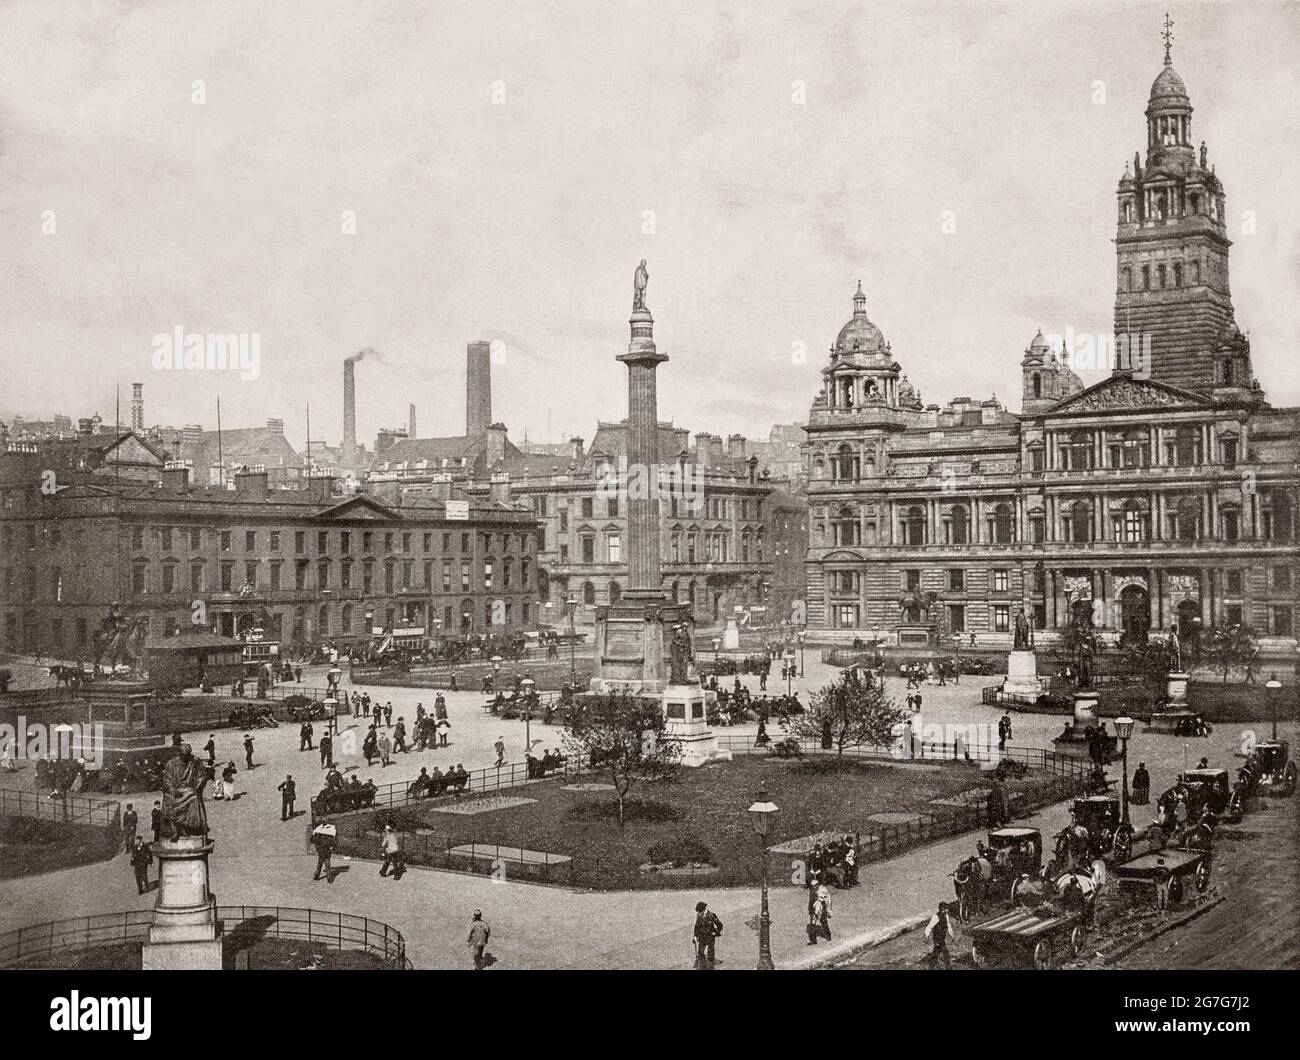 A late 19th century view of  George Square, the principal civic square in the city of Glasgow, Scotland. Named after King George III and initially laid out in 1781, it wasn't developed for another twenty years. The square memorial column to Walter Scott is surrounded by architecturally important buildings including (right)  the palatial Municipal Chambers, also known as the City Chambers, whose foundation stone was laid in 1883. Stock Photo